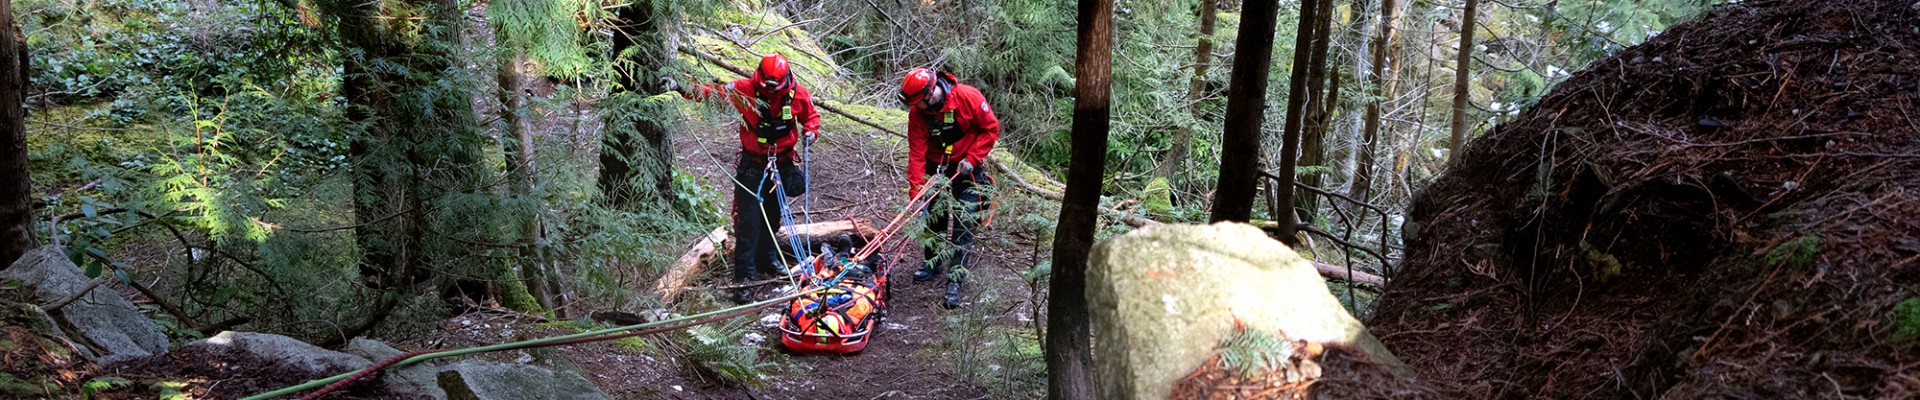 Two red-uniformed firefighters practise transporting an injured hiker in the woods.